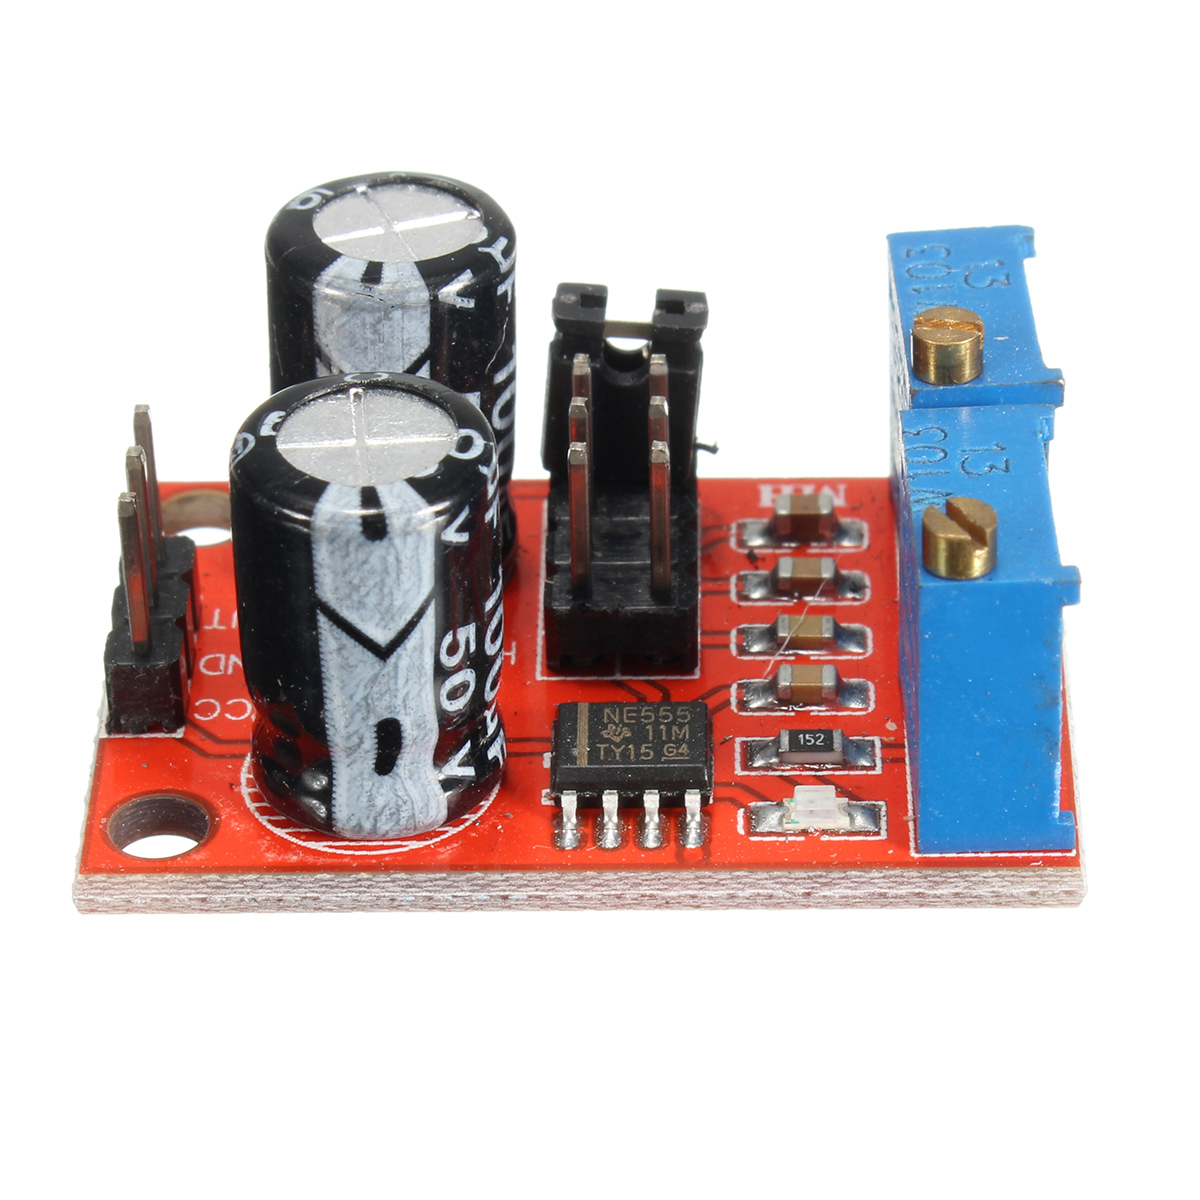 20pcs-NE555-Pulse-Frequency-Duty-Cycle-Adjustable-Module-Square-Wave-Signal-Generator-Stepper-Motor--1171963